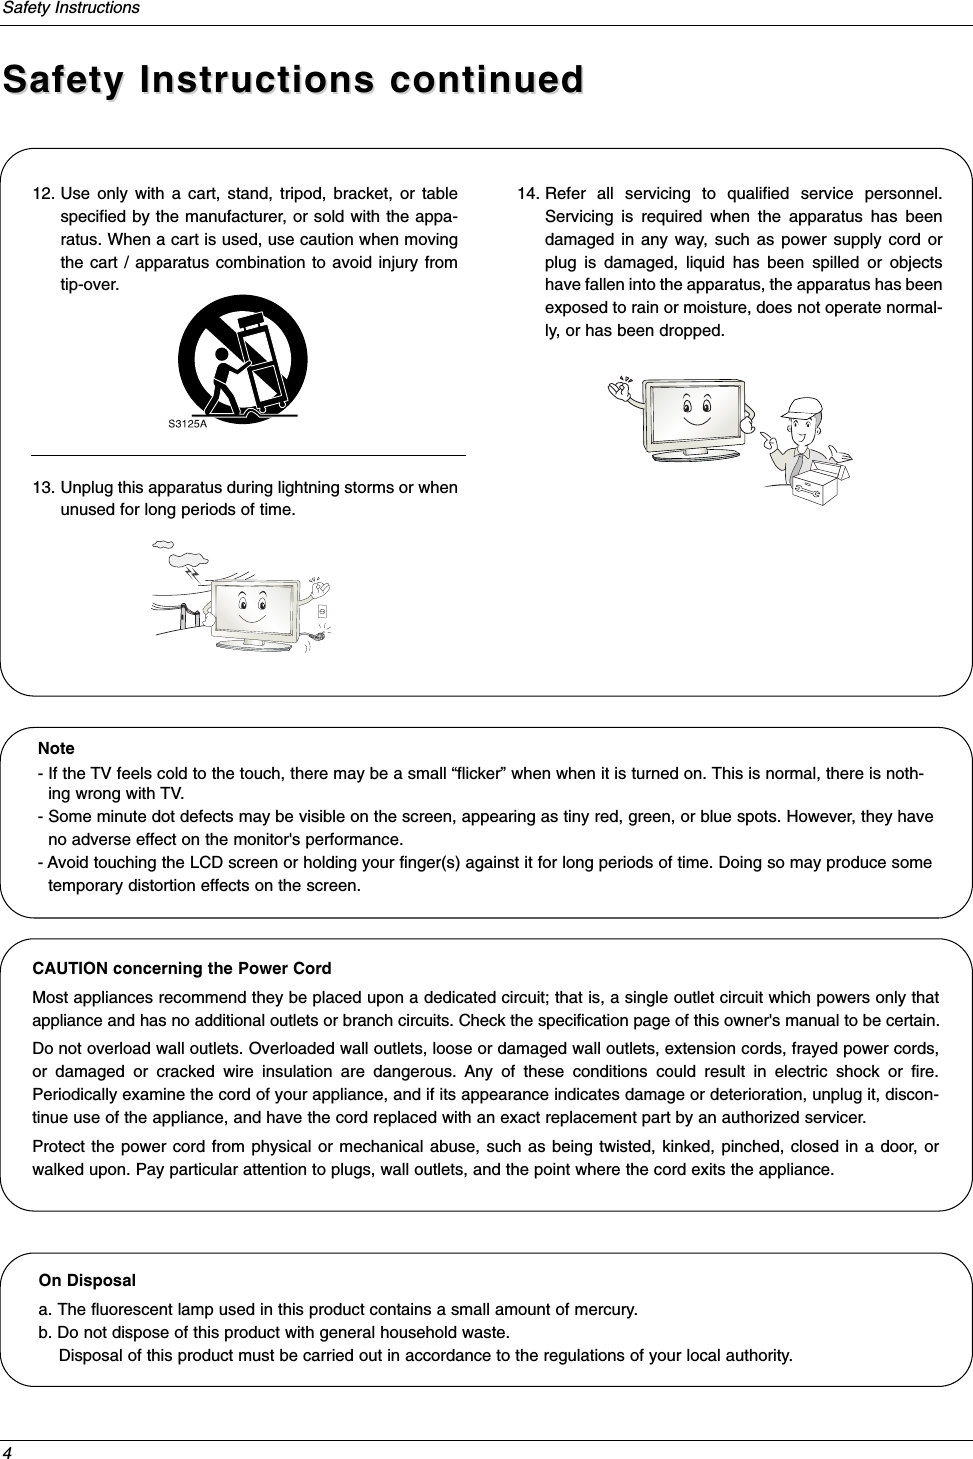 4Safety InstructionsSafety Instructions continuedSafety Instructions continued12. Use only with a cart, stand, tripod, bracket, or tablespecified by the manufacturer, or sold with the appa-ratus. When a cart is used, use caution when movingthe cart / apparatus combination to avoid injury fromtip-over.13. Unplug this apparatus during lightning storms or whenunused for long periods of time.14. Refer all servicing to qualified service personnel.Servicing is required when the apparatus has beendamaged in any way, such as power supply cord orplug is damaged, liquid has been spilled or objectshave fallen into the apparatus, the apparatus has beenexposed to rain or moisture, does not operate normal-ly, or has been dropped.On Disposal a. The fluorescent lamp used in this product contains a small amount of mercury.b. Do not dispose of this product with general household waste.Disposal of this product must be carried out in accordance to the regulations of your local authority.Note- If the TV feels cold to the touch, there may be a small “flicker” when when it is turned on. This is normal, there is noth-ing wrong with TV.- Some minute dot defects may be visible on the screen, appearing as tiny red, green, or blue spots. However, they haveno adverse effect on the monitor&apos;s performance.- Avoid touching the LCD screen or holding your finger(s) against it for long periods of time. Doing so may produce sometemporary distortion effects on the screen.CAUTION concerning the Power CordMost appliances recommend they be placed upon a dedicated circuit; that is, a single outlet circuit which powers only thatappliance and has no additional outlets or branch circuits. Check the specification page of this owner&apos;s manual to be certain.Do not overload wall outlets. Overloaded wall outlets, loose or damaged wall outlets, extension cords, frayed power cords,or damaged or cracked wire insulation are dangerous. Any of these conditions could result in electric shock or fire.Periodically examine the cord of your appliance, and if its appearance indicates damage or deterioration, unplug it, discon-tinue use of the appliance, and have the cord replaced with an exact replacement part by an authorized servicer.Protect the power cord from physical or mechanical abuse, such as being twisted, kinked, pinched, closed in a door, orwalked upon. Pay particular attention to plugs, wall outlets, and the point where the cord exits the appliance.